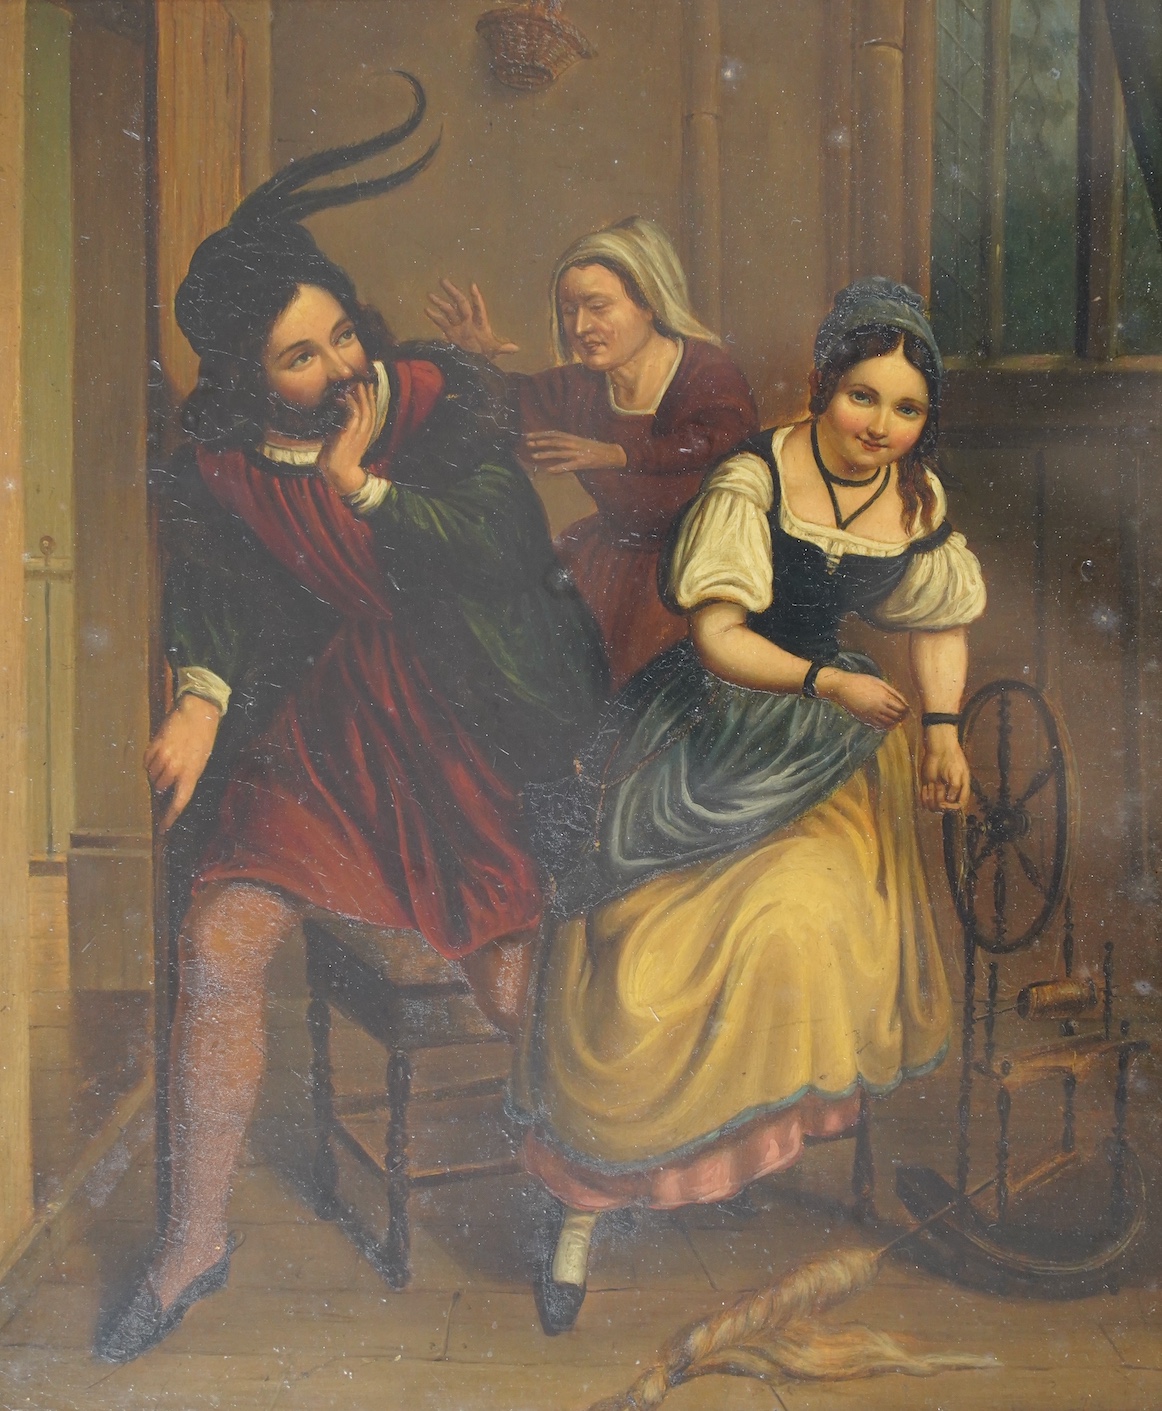 19th century German School, oil on metal panel, possibly zinc, Three figures in an interior, 25 x 20cm, gilt framed. Condition - fair to good